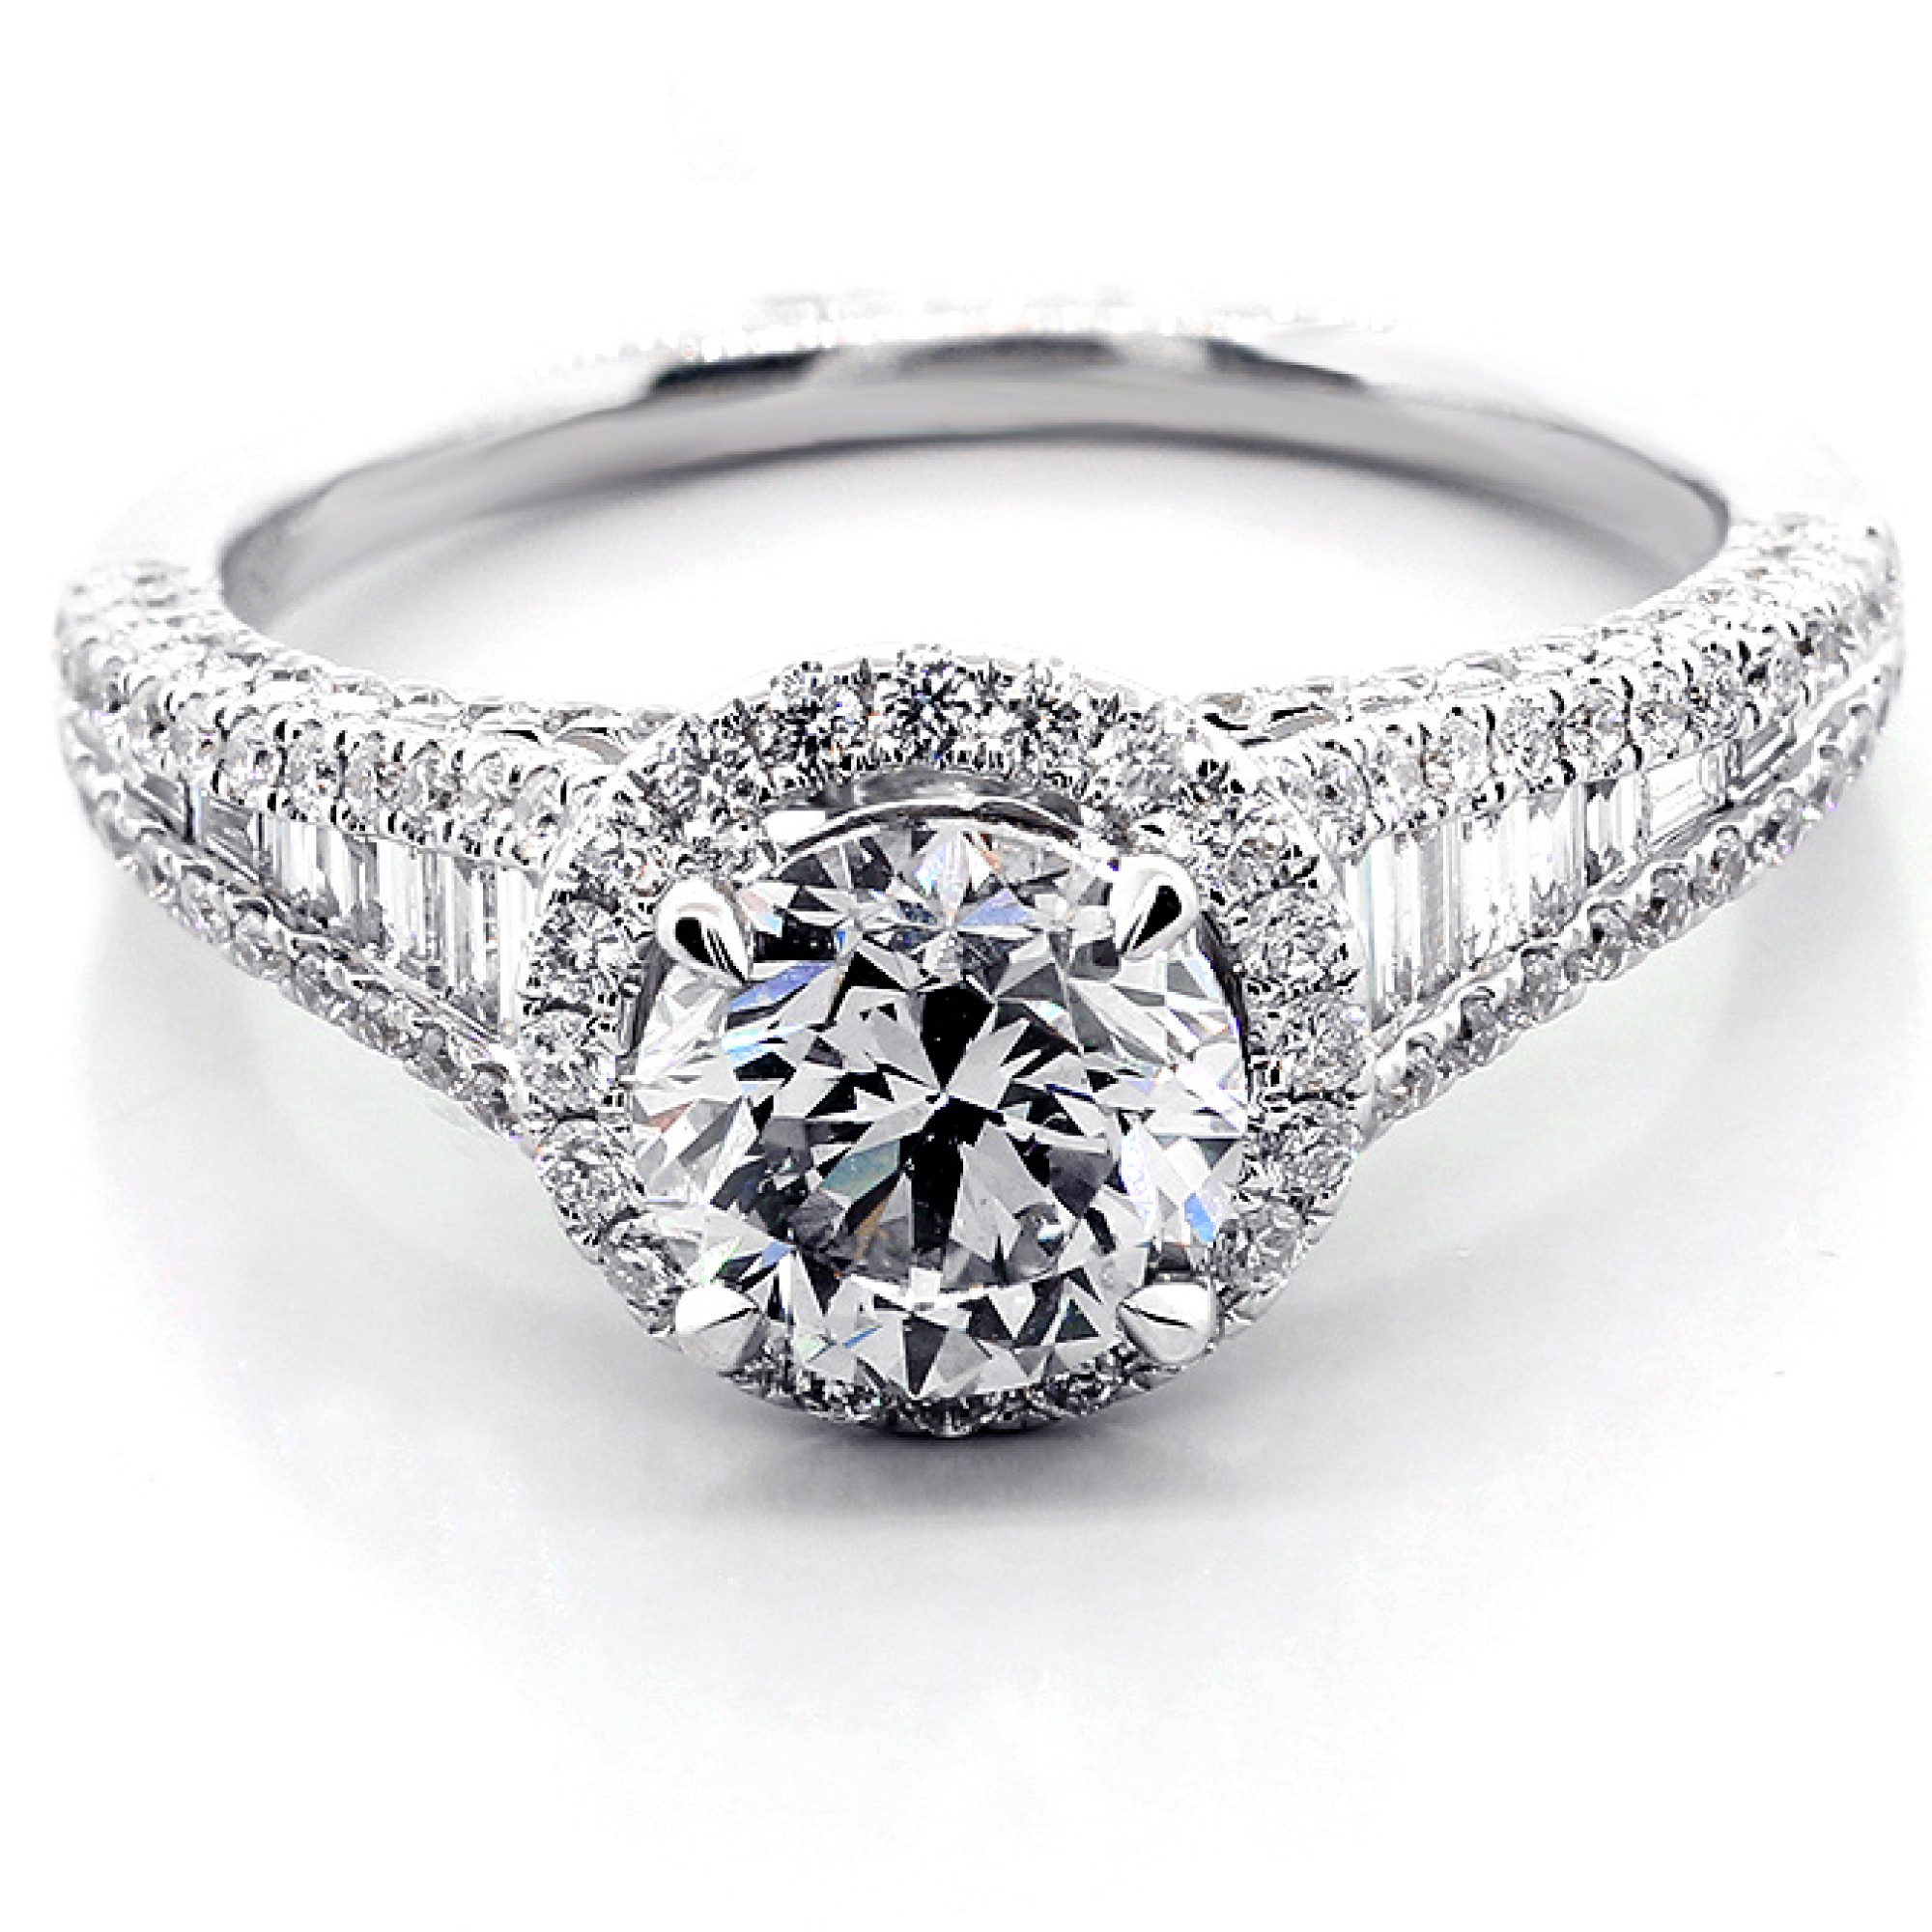 2.13 Cts Round Cut Diamond Halo Engagement Ring set in 18K White Gold ...